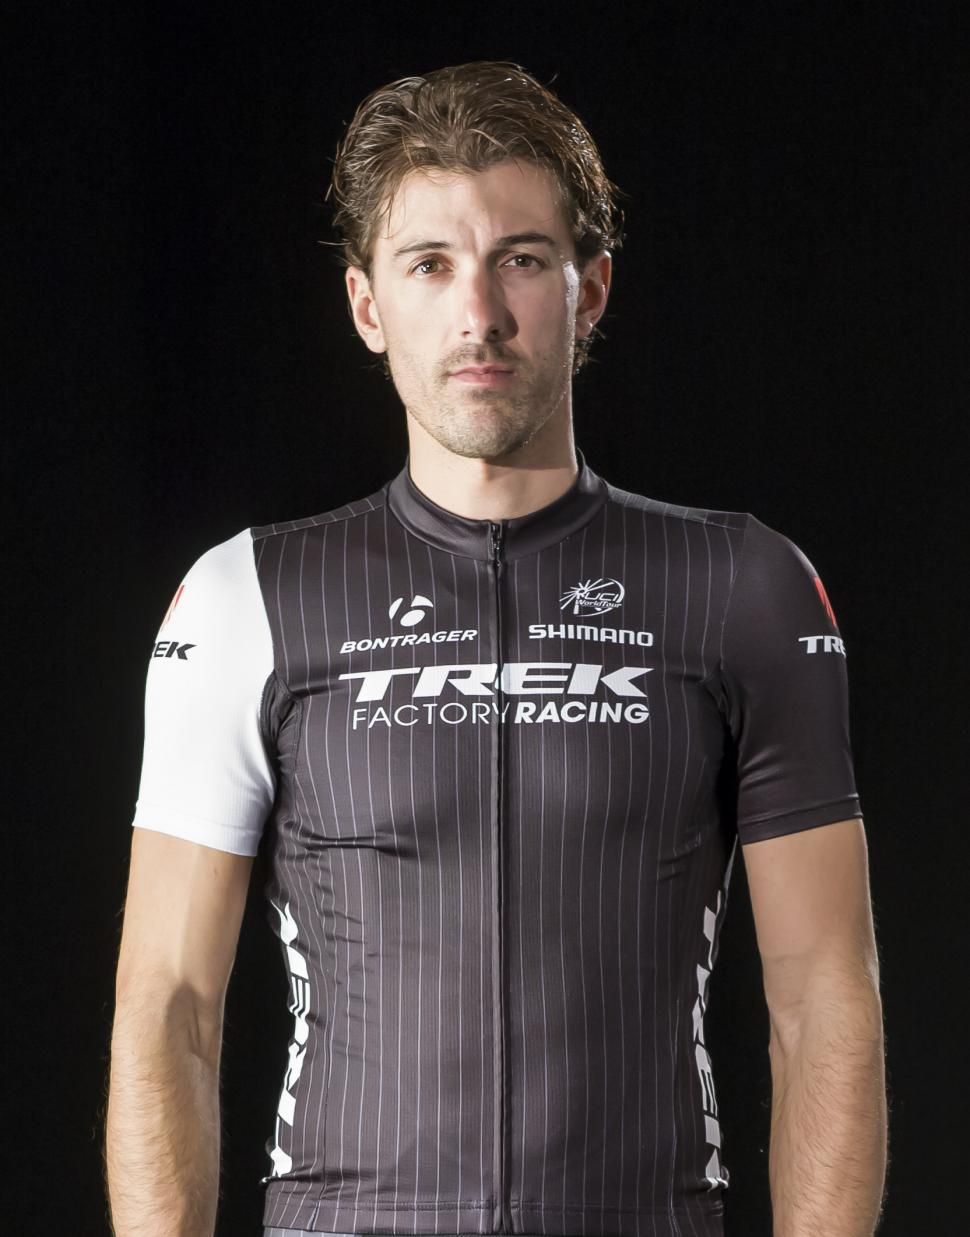 Your cut out and keep guide to 2014 WorldTour team kits | road.cc